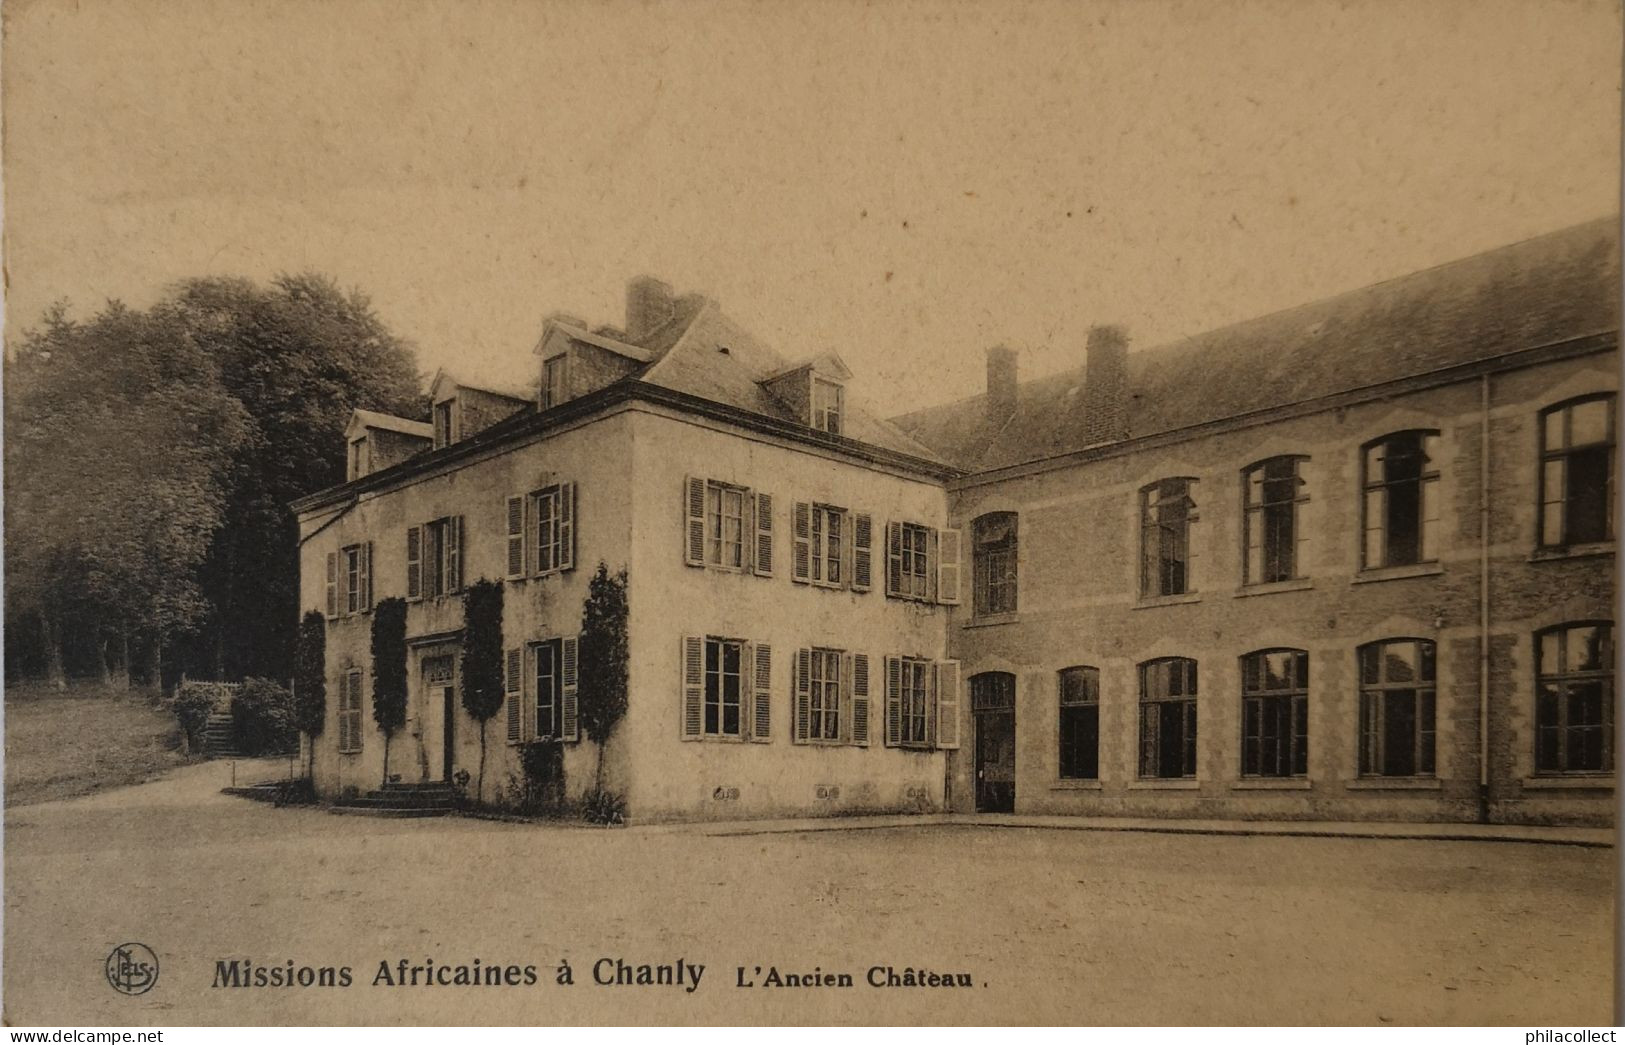 Chanly (Wellin) Missions Africans - Ancien Chateau 19?? - Wellin